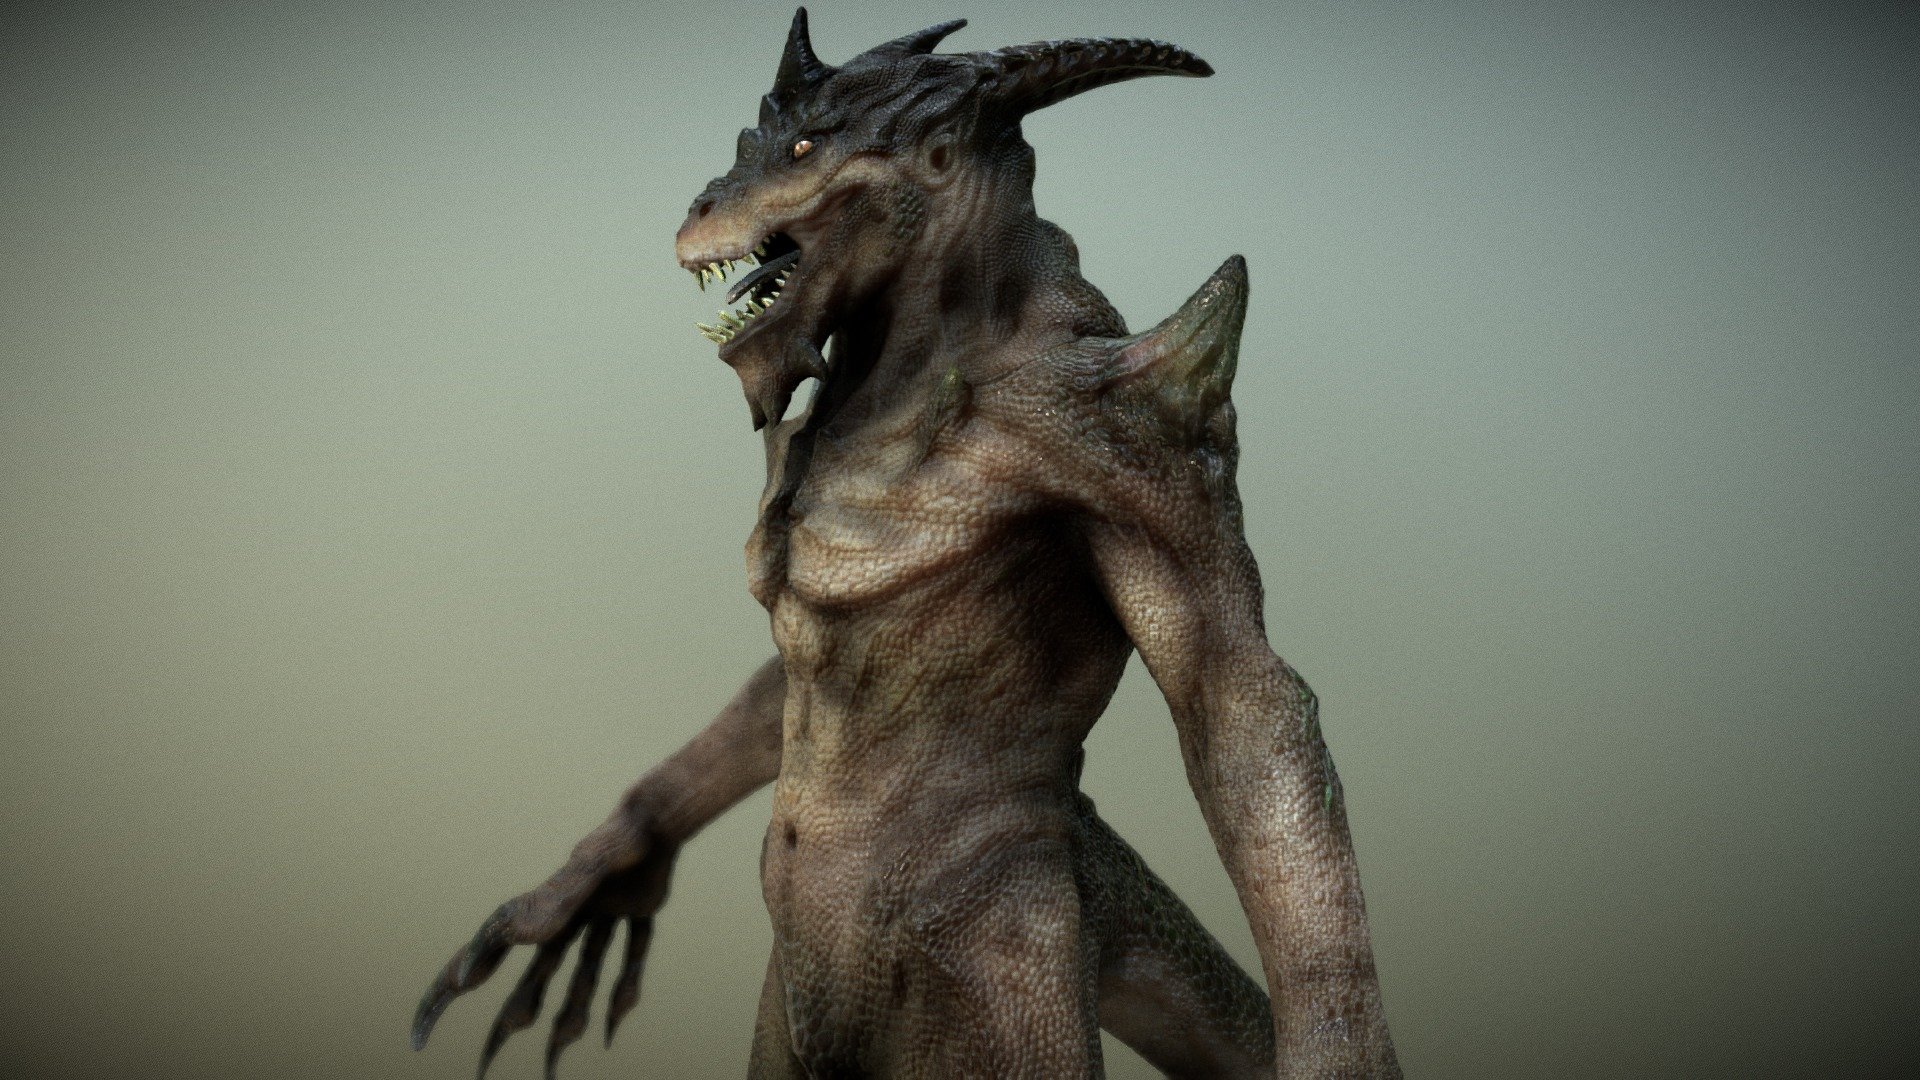 Lester is a hybrid of dragon and satyr - Lester - 3D model by robertfabiani 3d model